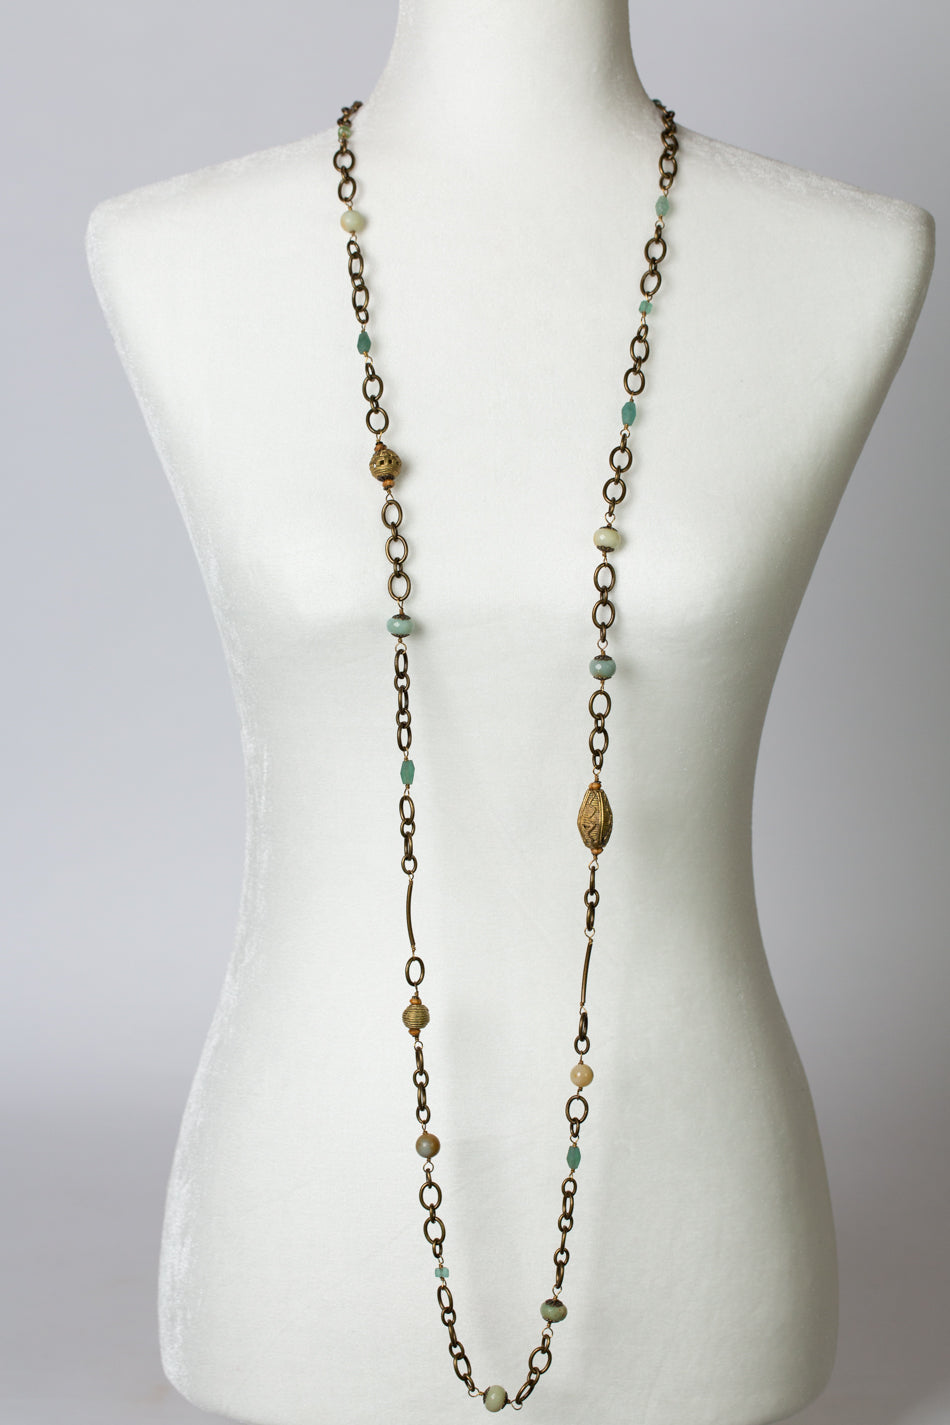 One Of A Kind 58-60" Roman Glass And Handmade African Beads Collage Necklace